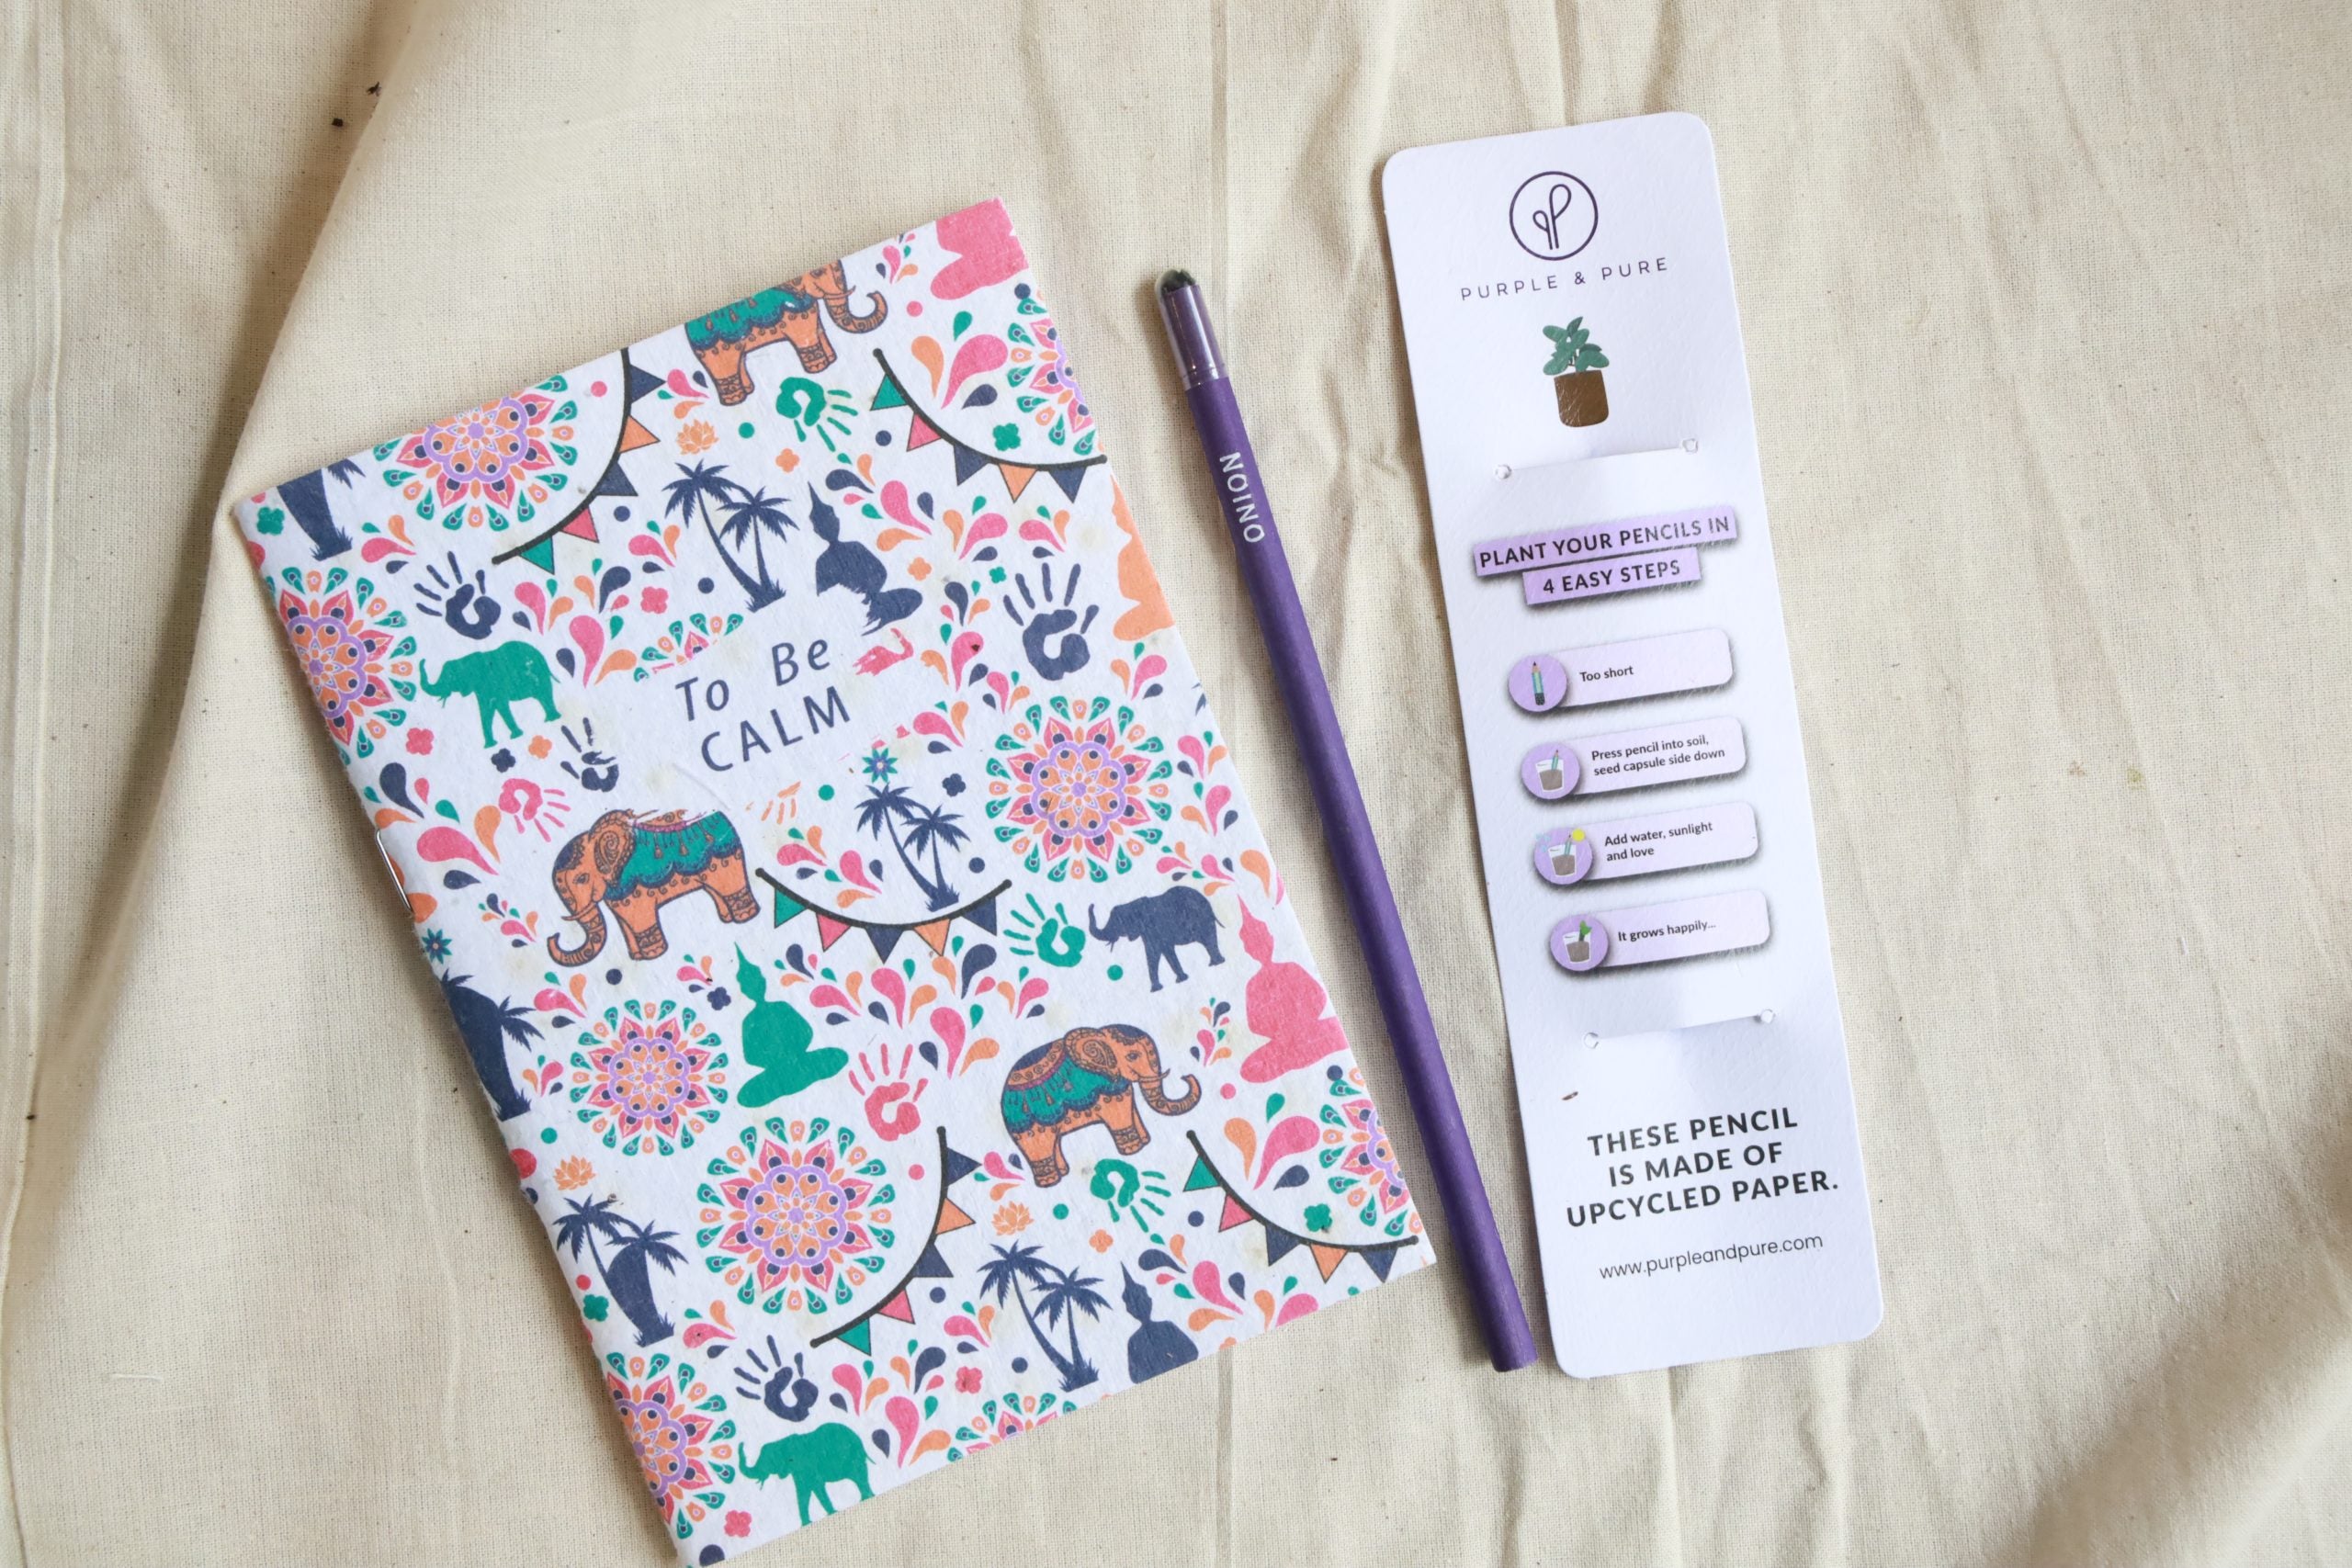 Buddha Notebook Set by Purple & Pure | Available at The Green Collective